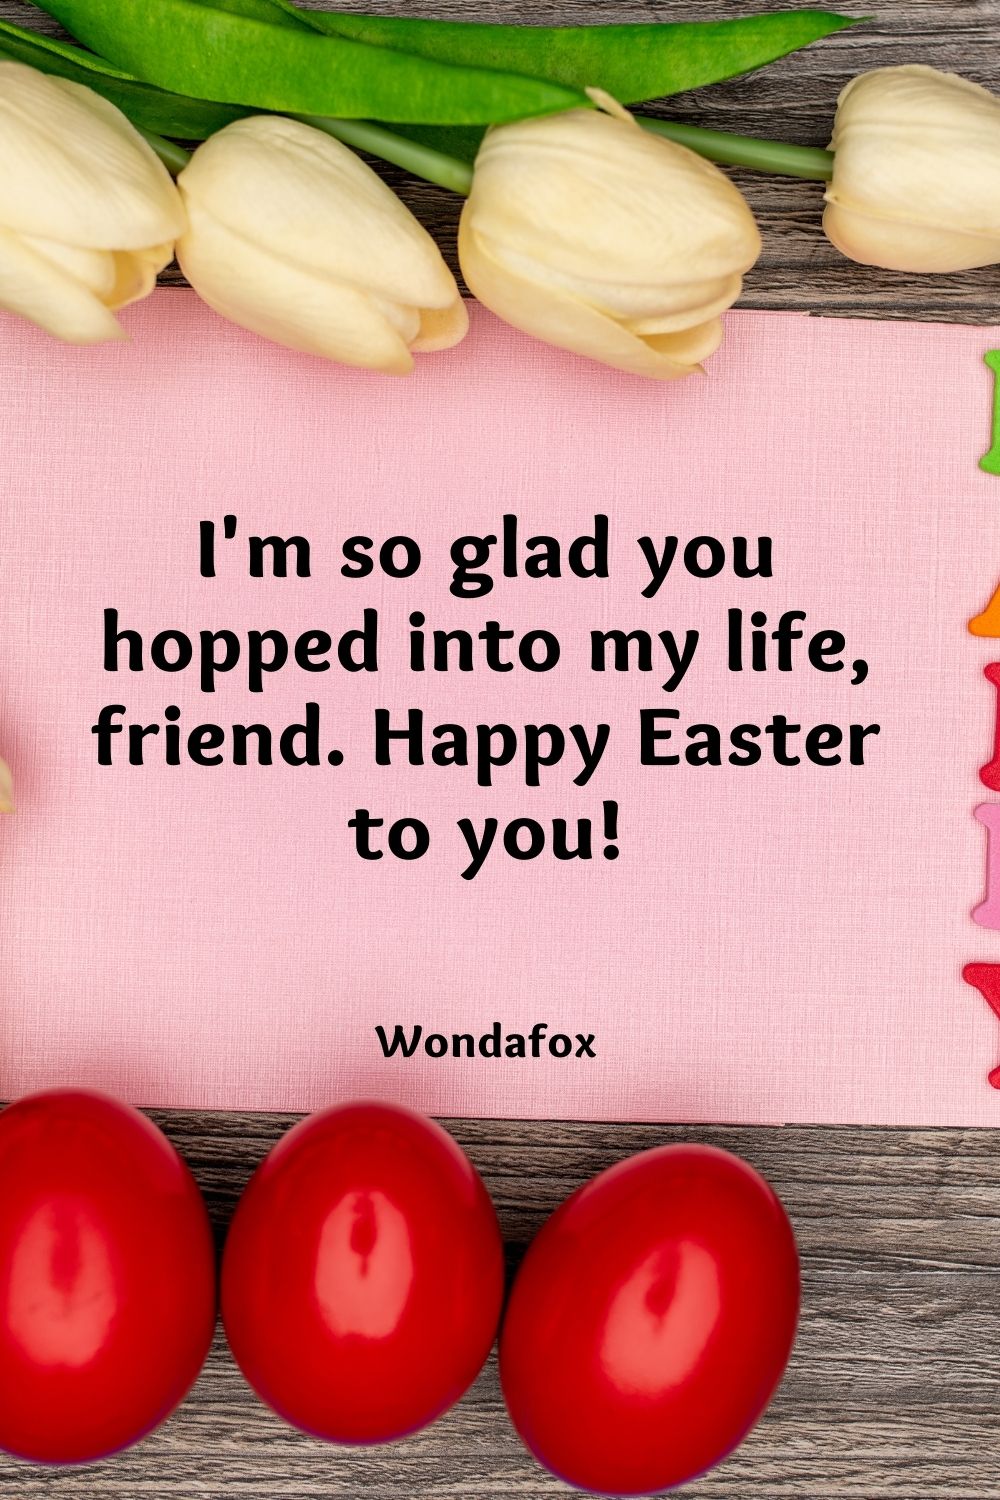 I'm so glad you hopped into my life, friend. Happy Easter to you!